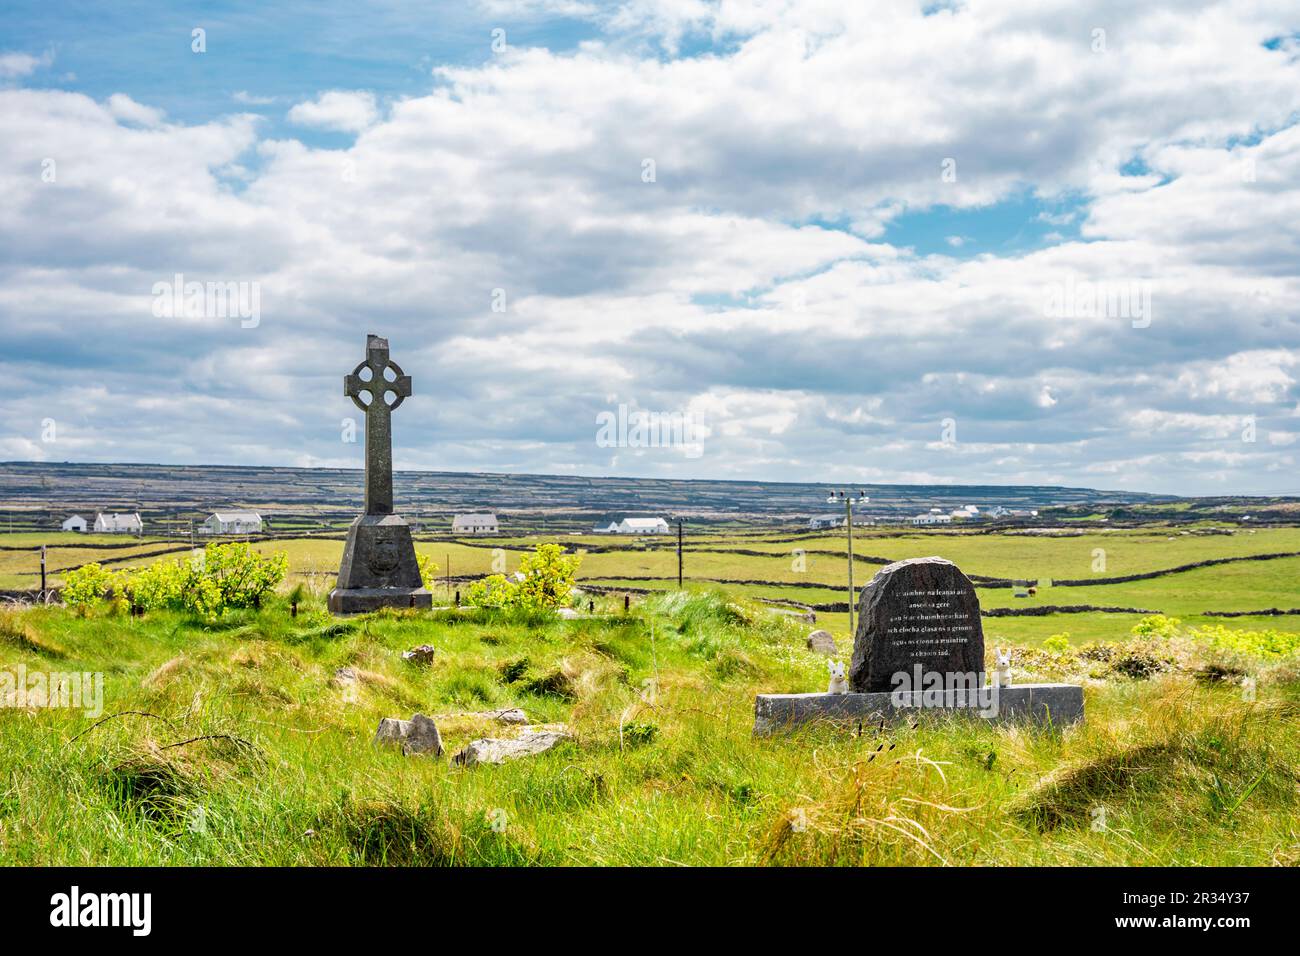 Graveyard with celtic cross in Inis Mór, or Inishmore, the largest of the Aran Islands in Galway Bay, off the west coast of Ireland. Stock Photo